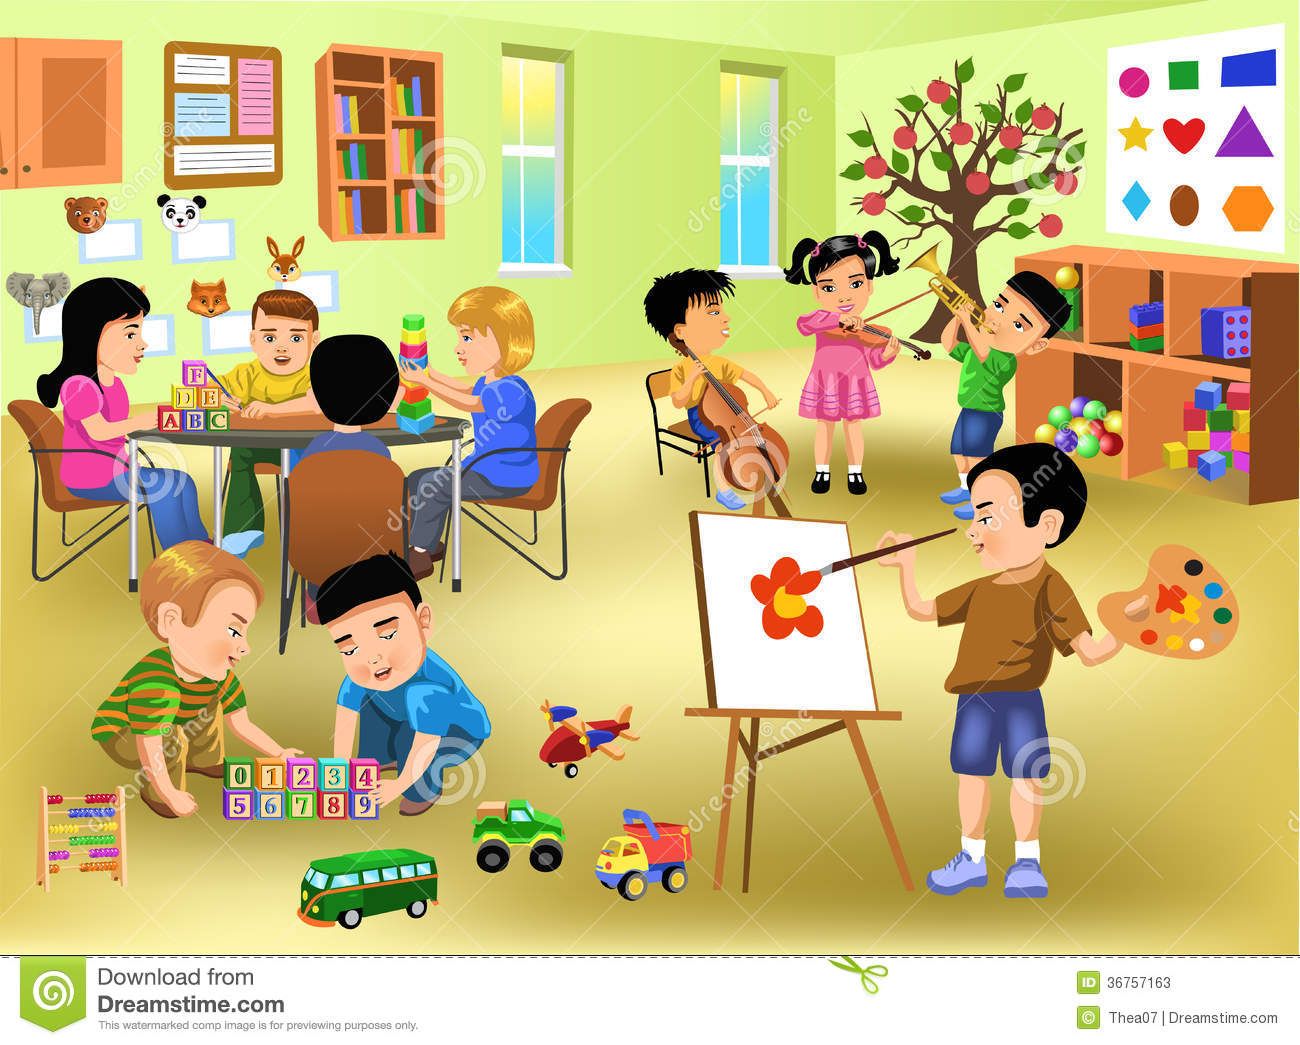 Image result for teacher resources clipart